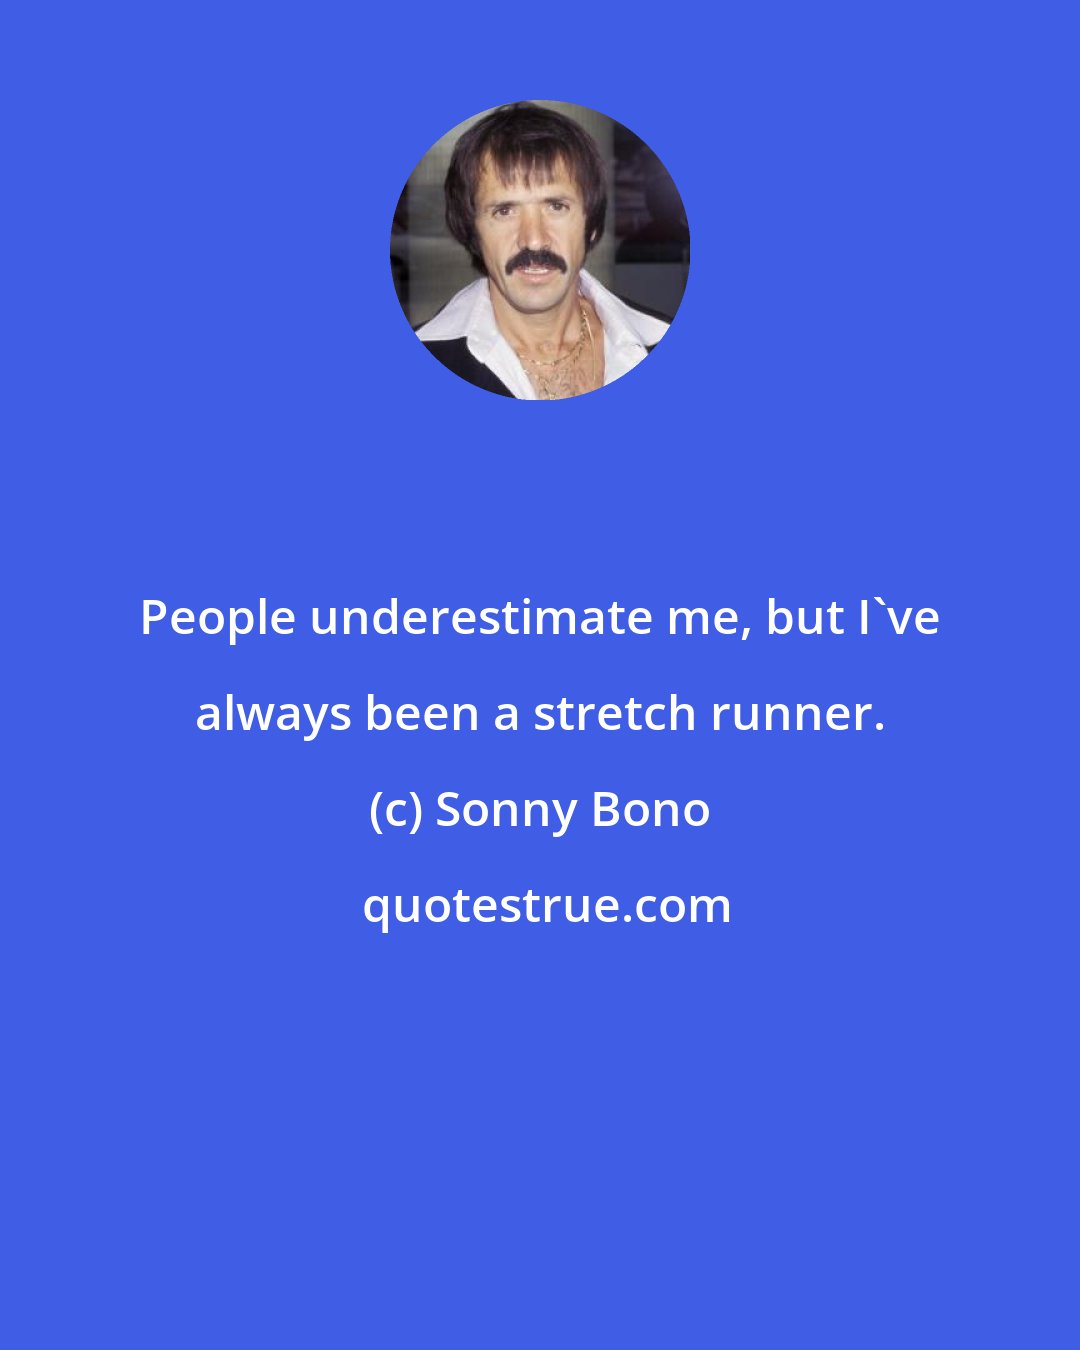 Sonny Bono: People underestimate me, but I've always been a stretch runner.